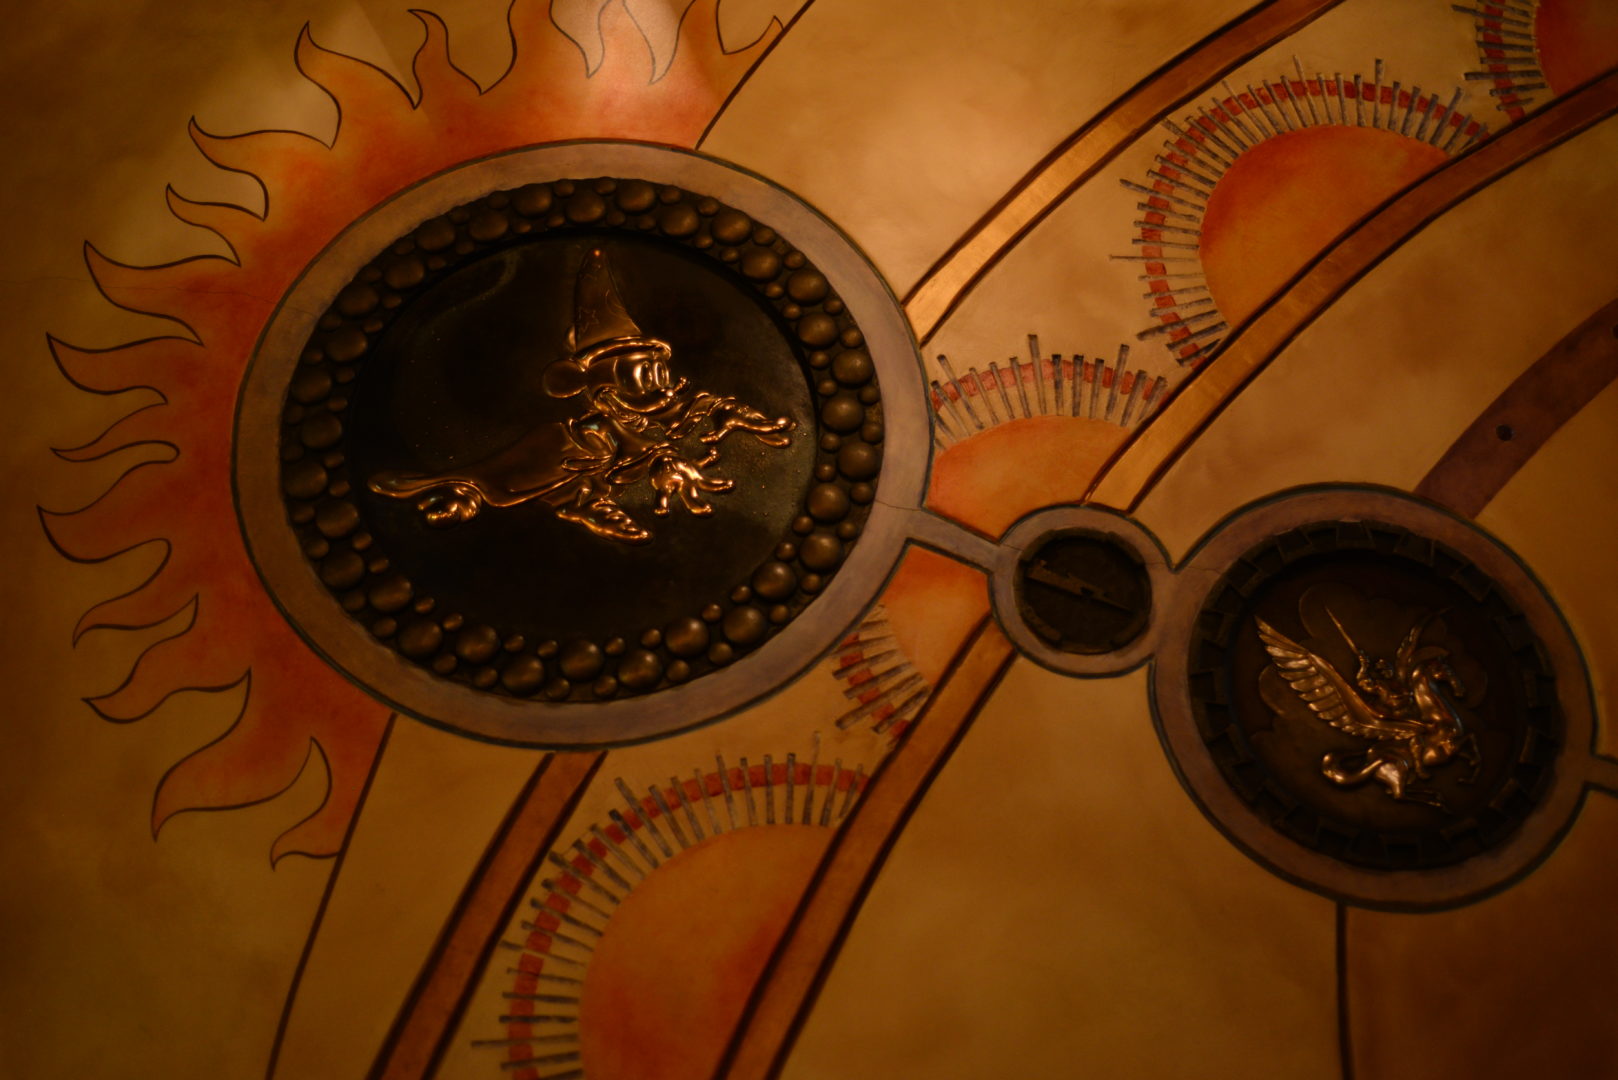 Sorcerer's Workshop - Mickey Metal Sculpture on the ceiling of Animation Courtyard in Disneyland